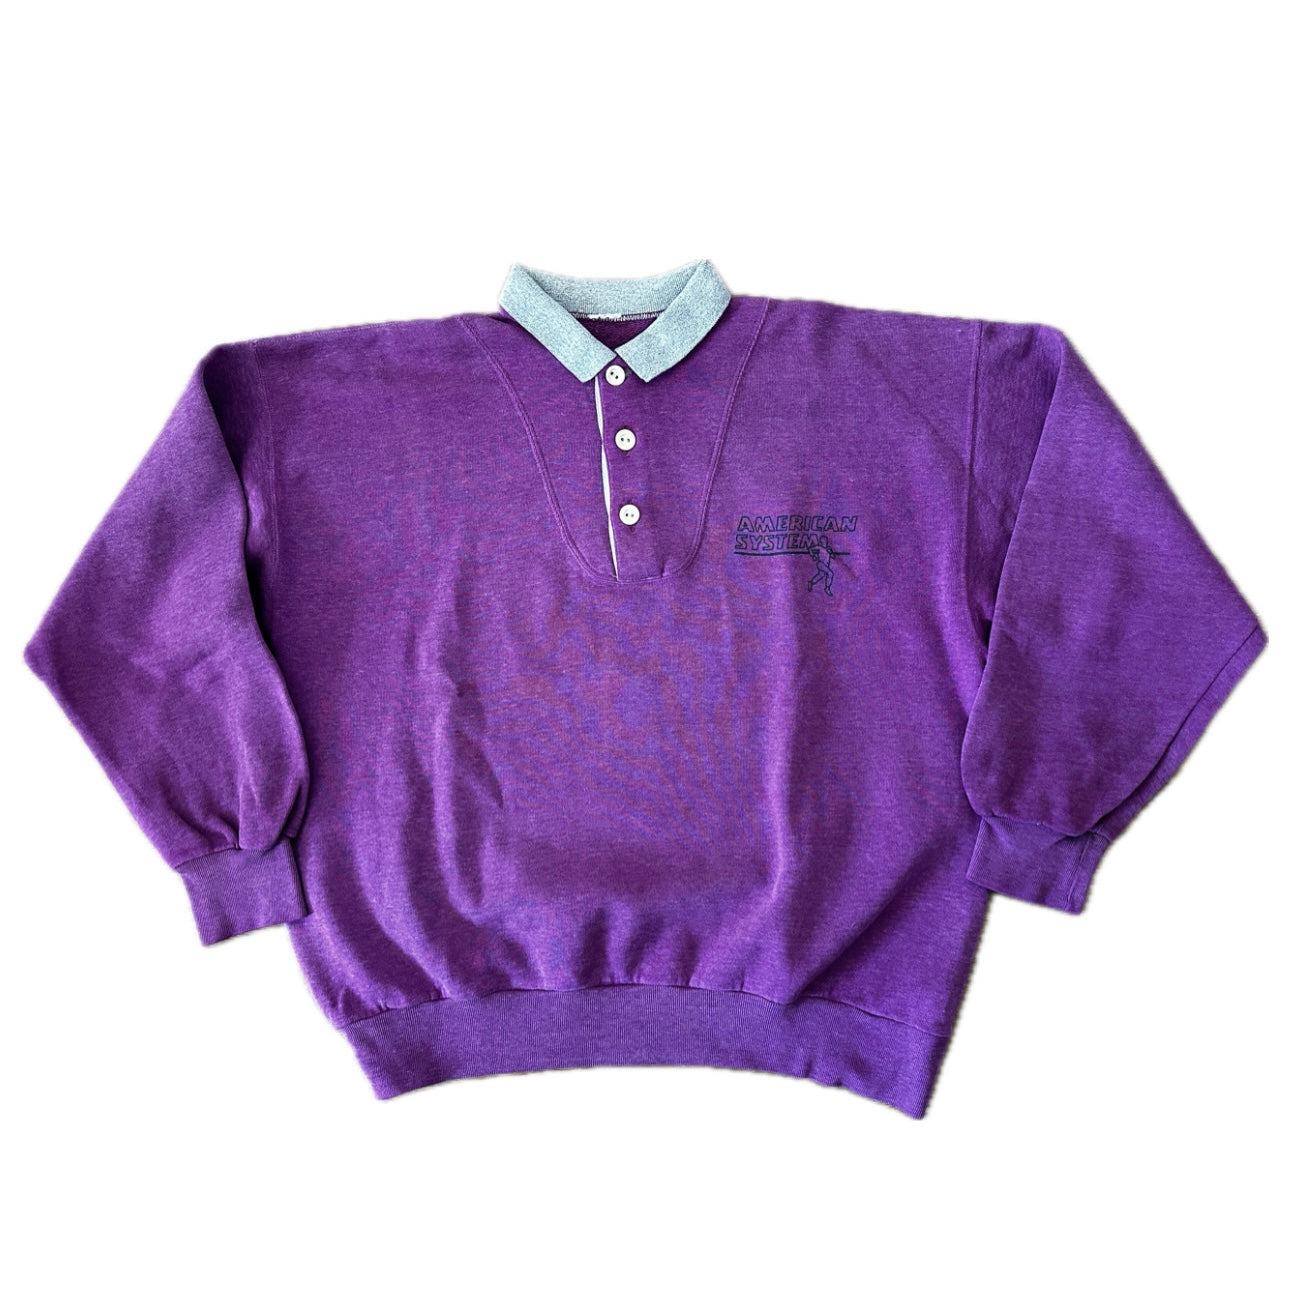 American System 80s Polo Sweatshirt - L - Made in Italy